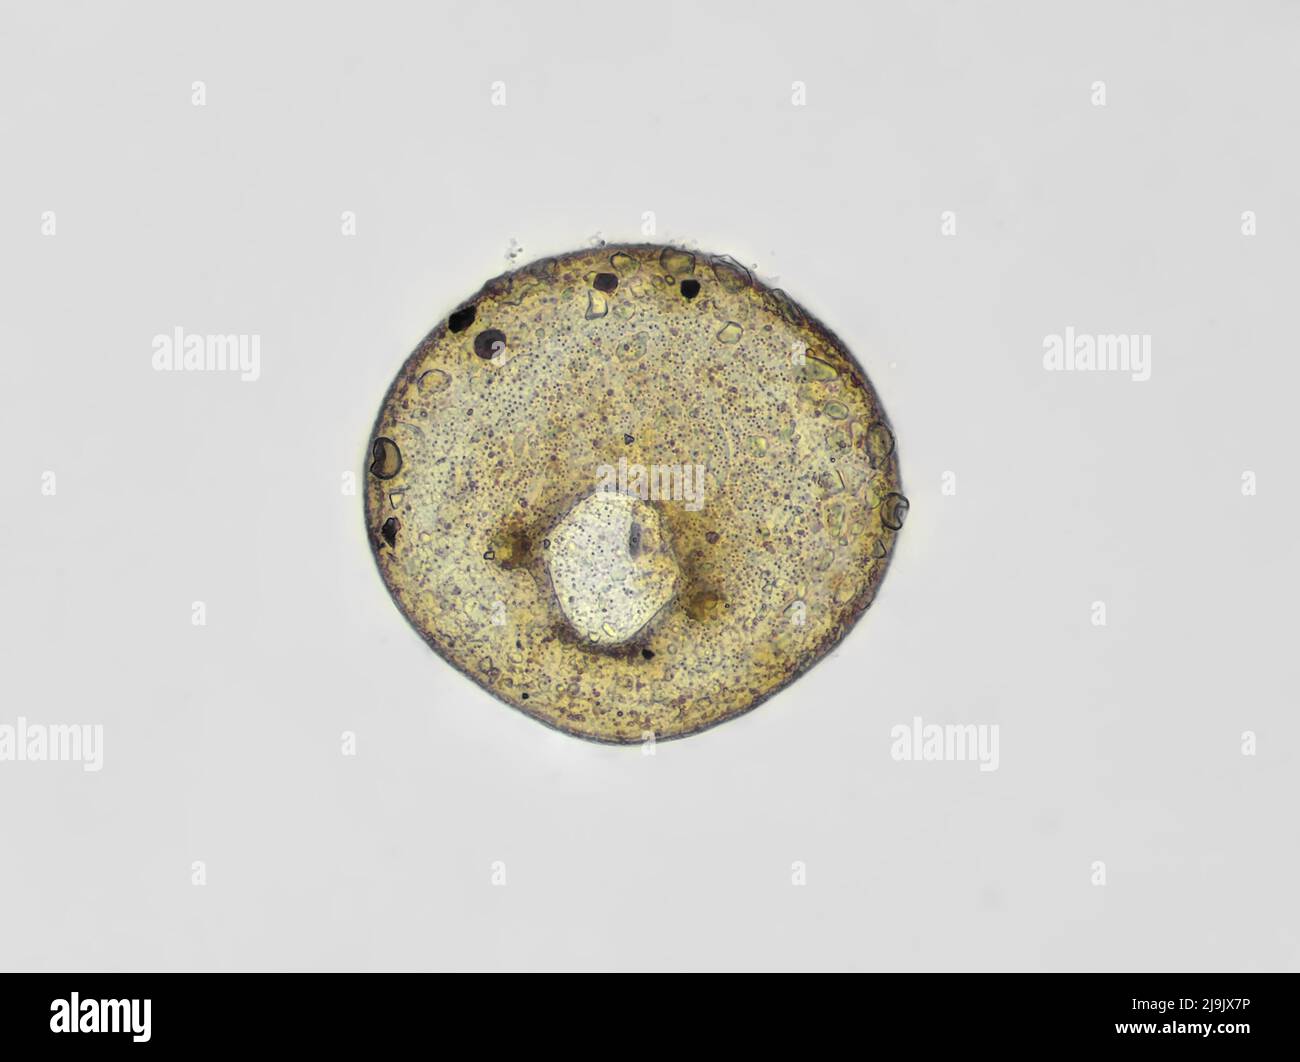 Testate amoeba shell (Centropyxis sp.) from a garden soil sample, bright field micrograph Stock Photo